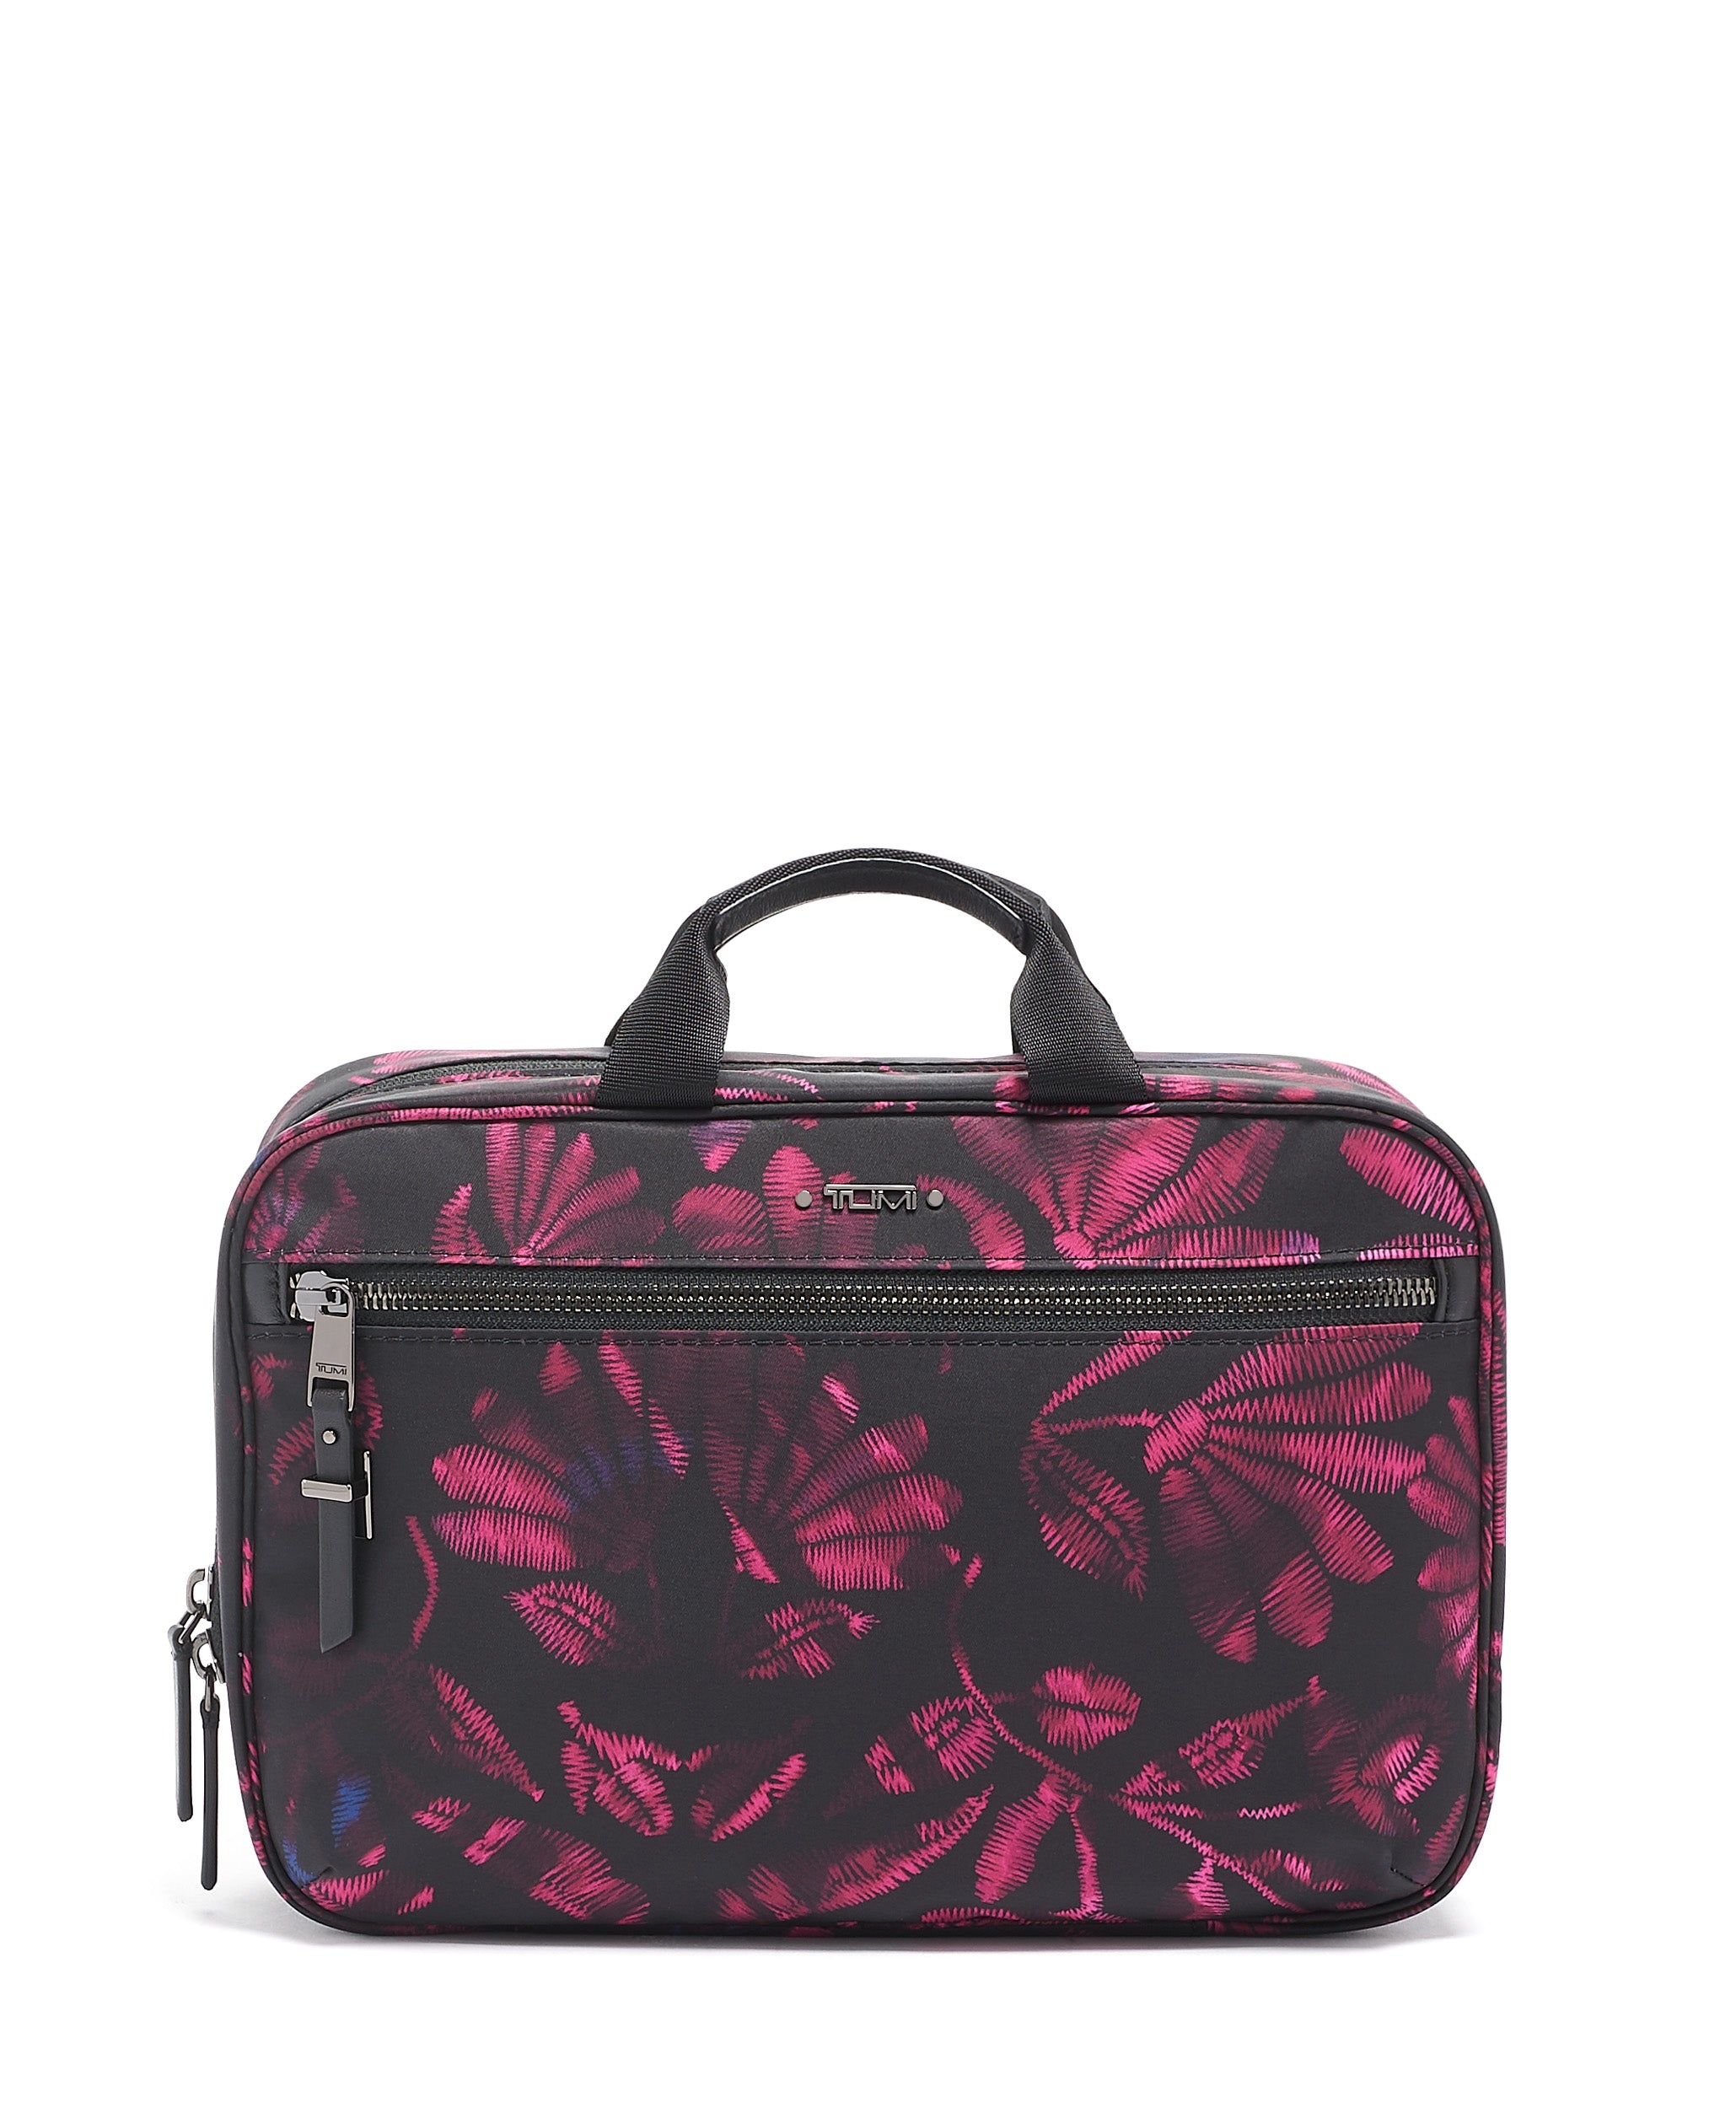 TUMI Voyageur Madina Cosmetic - Floral Tapestry